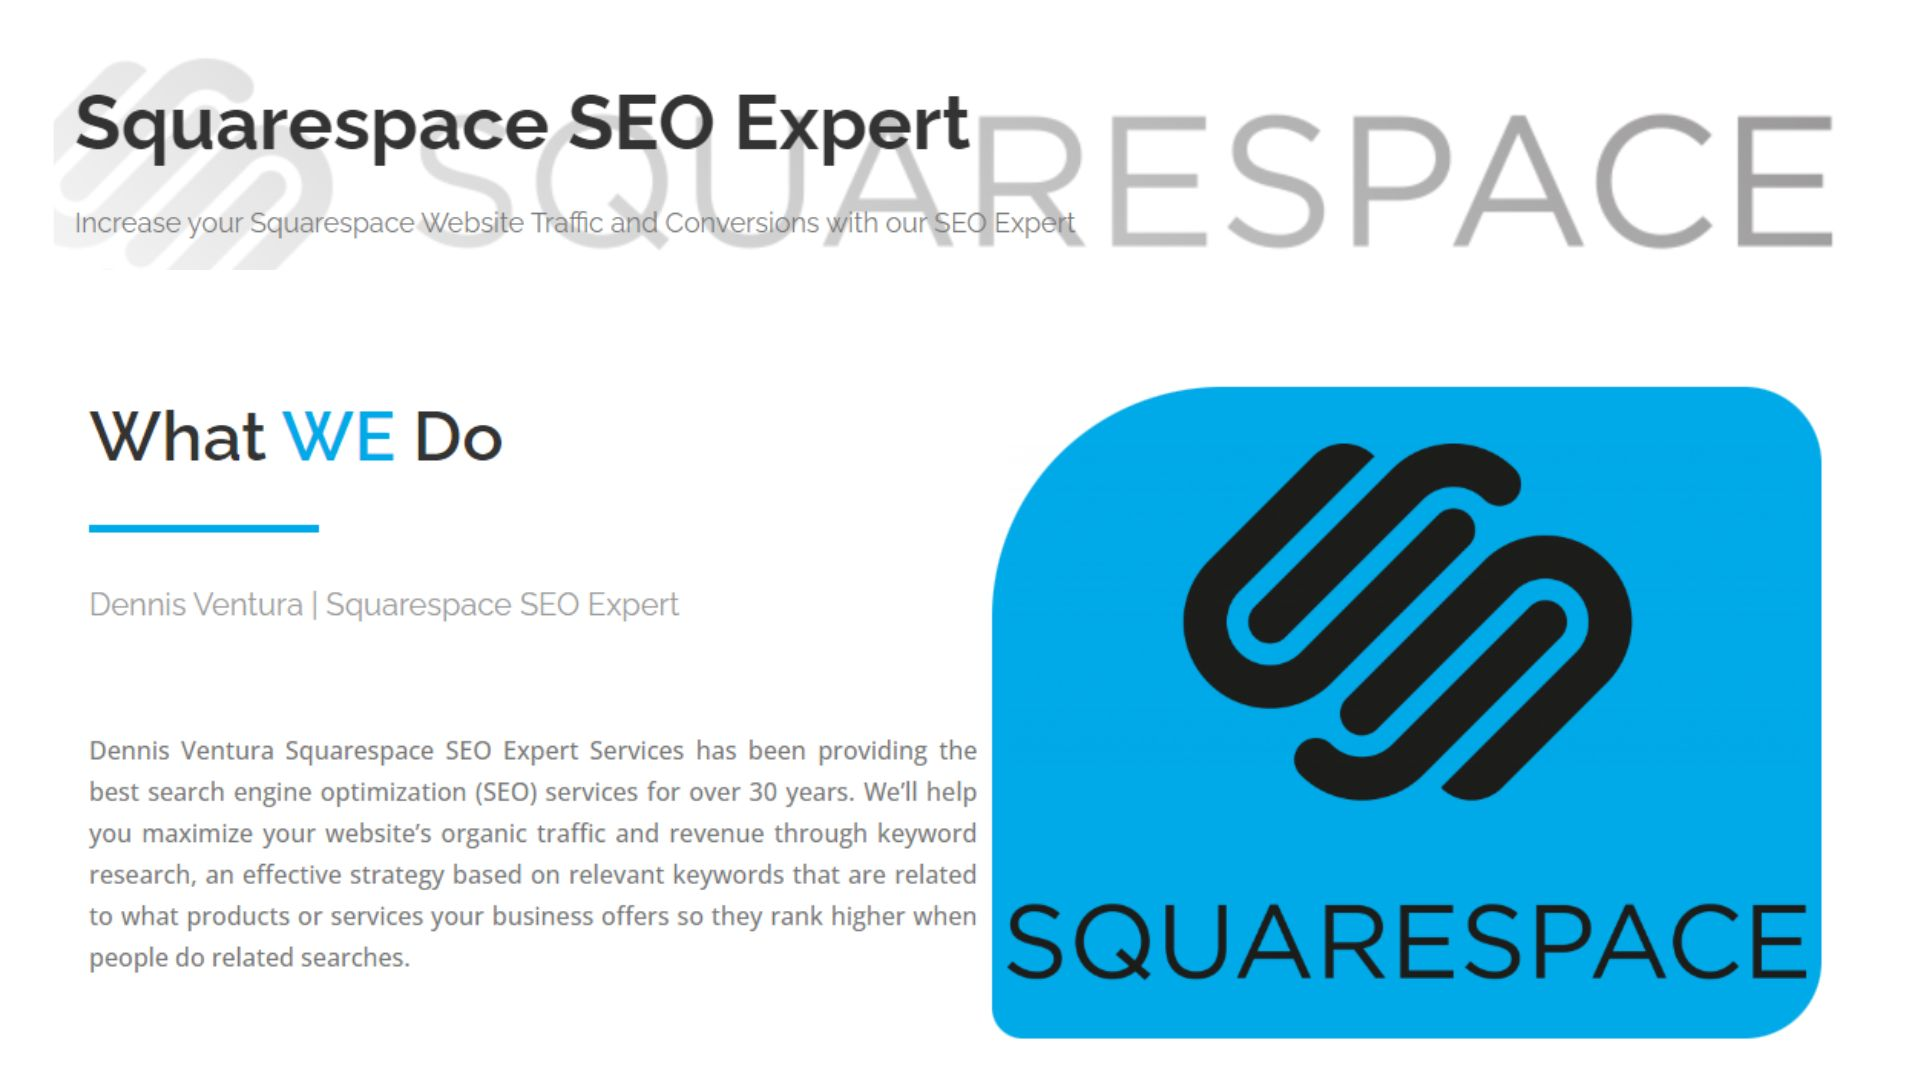 What is The Basis of Squarespace SEO Expert?